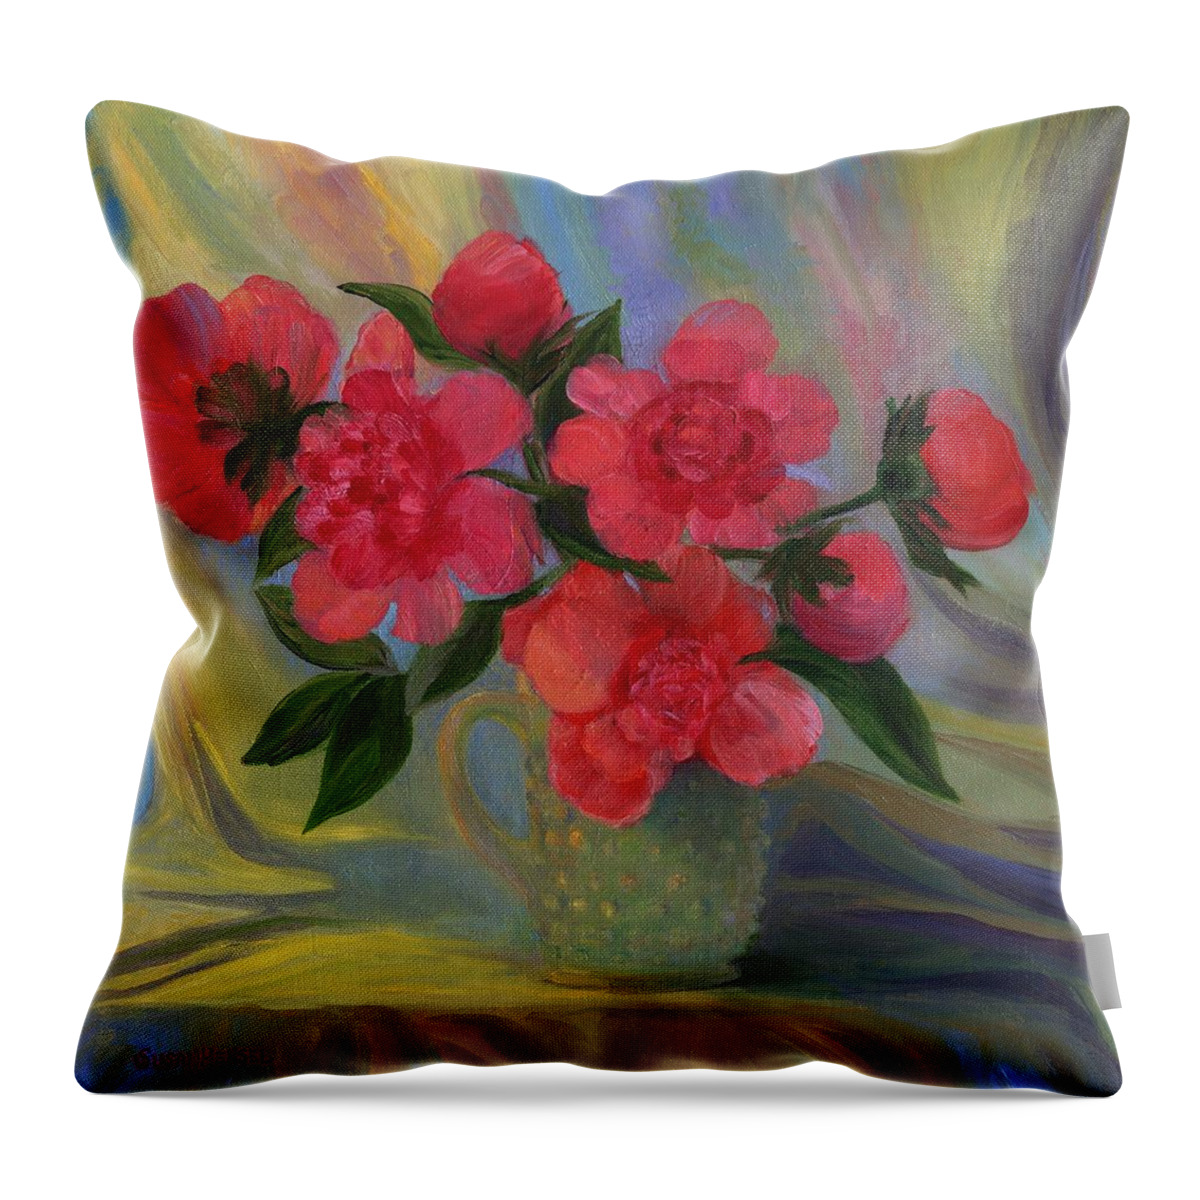 Flowers Throw Pillow featuring the painting Heirlooms by Susan Hensel